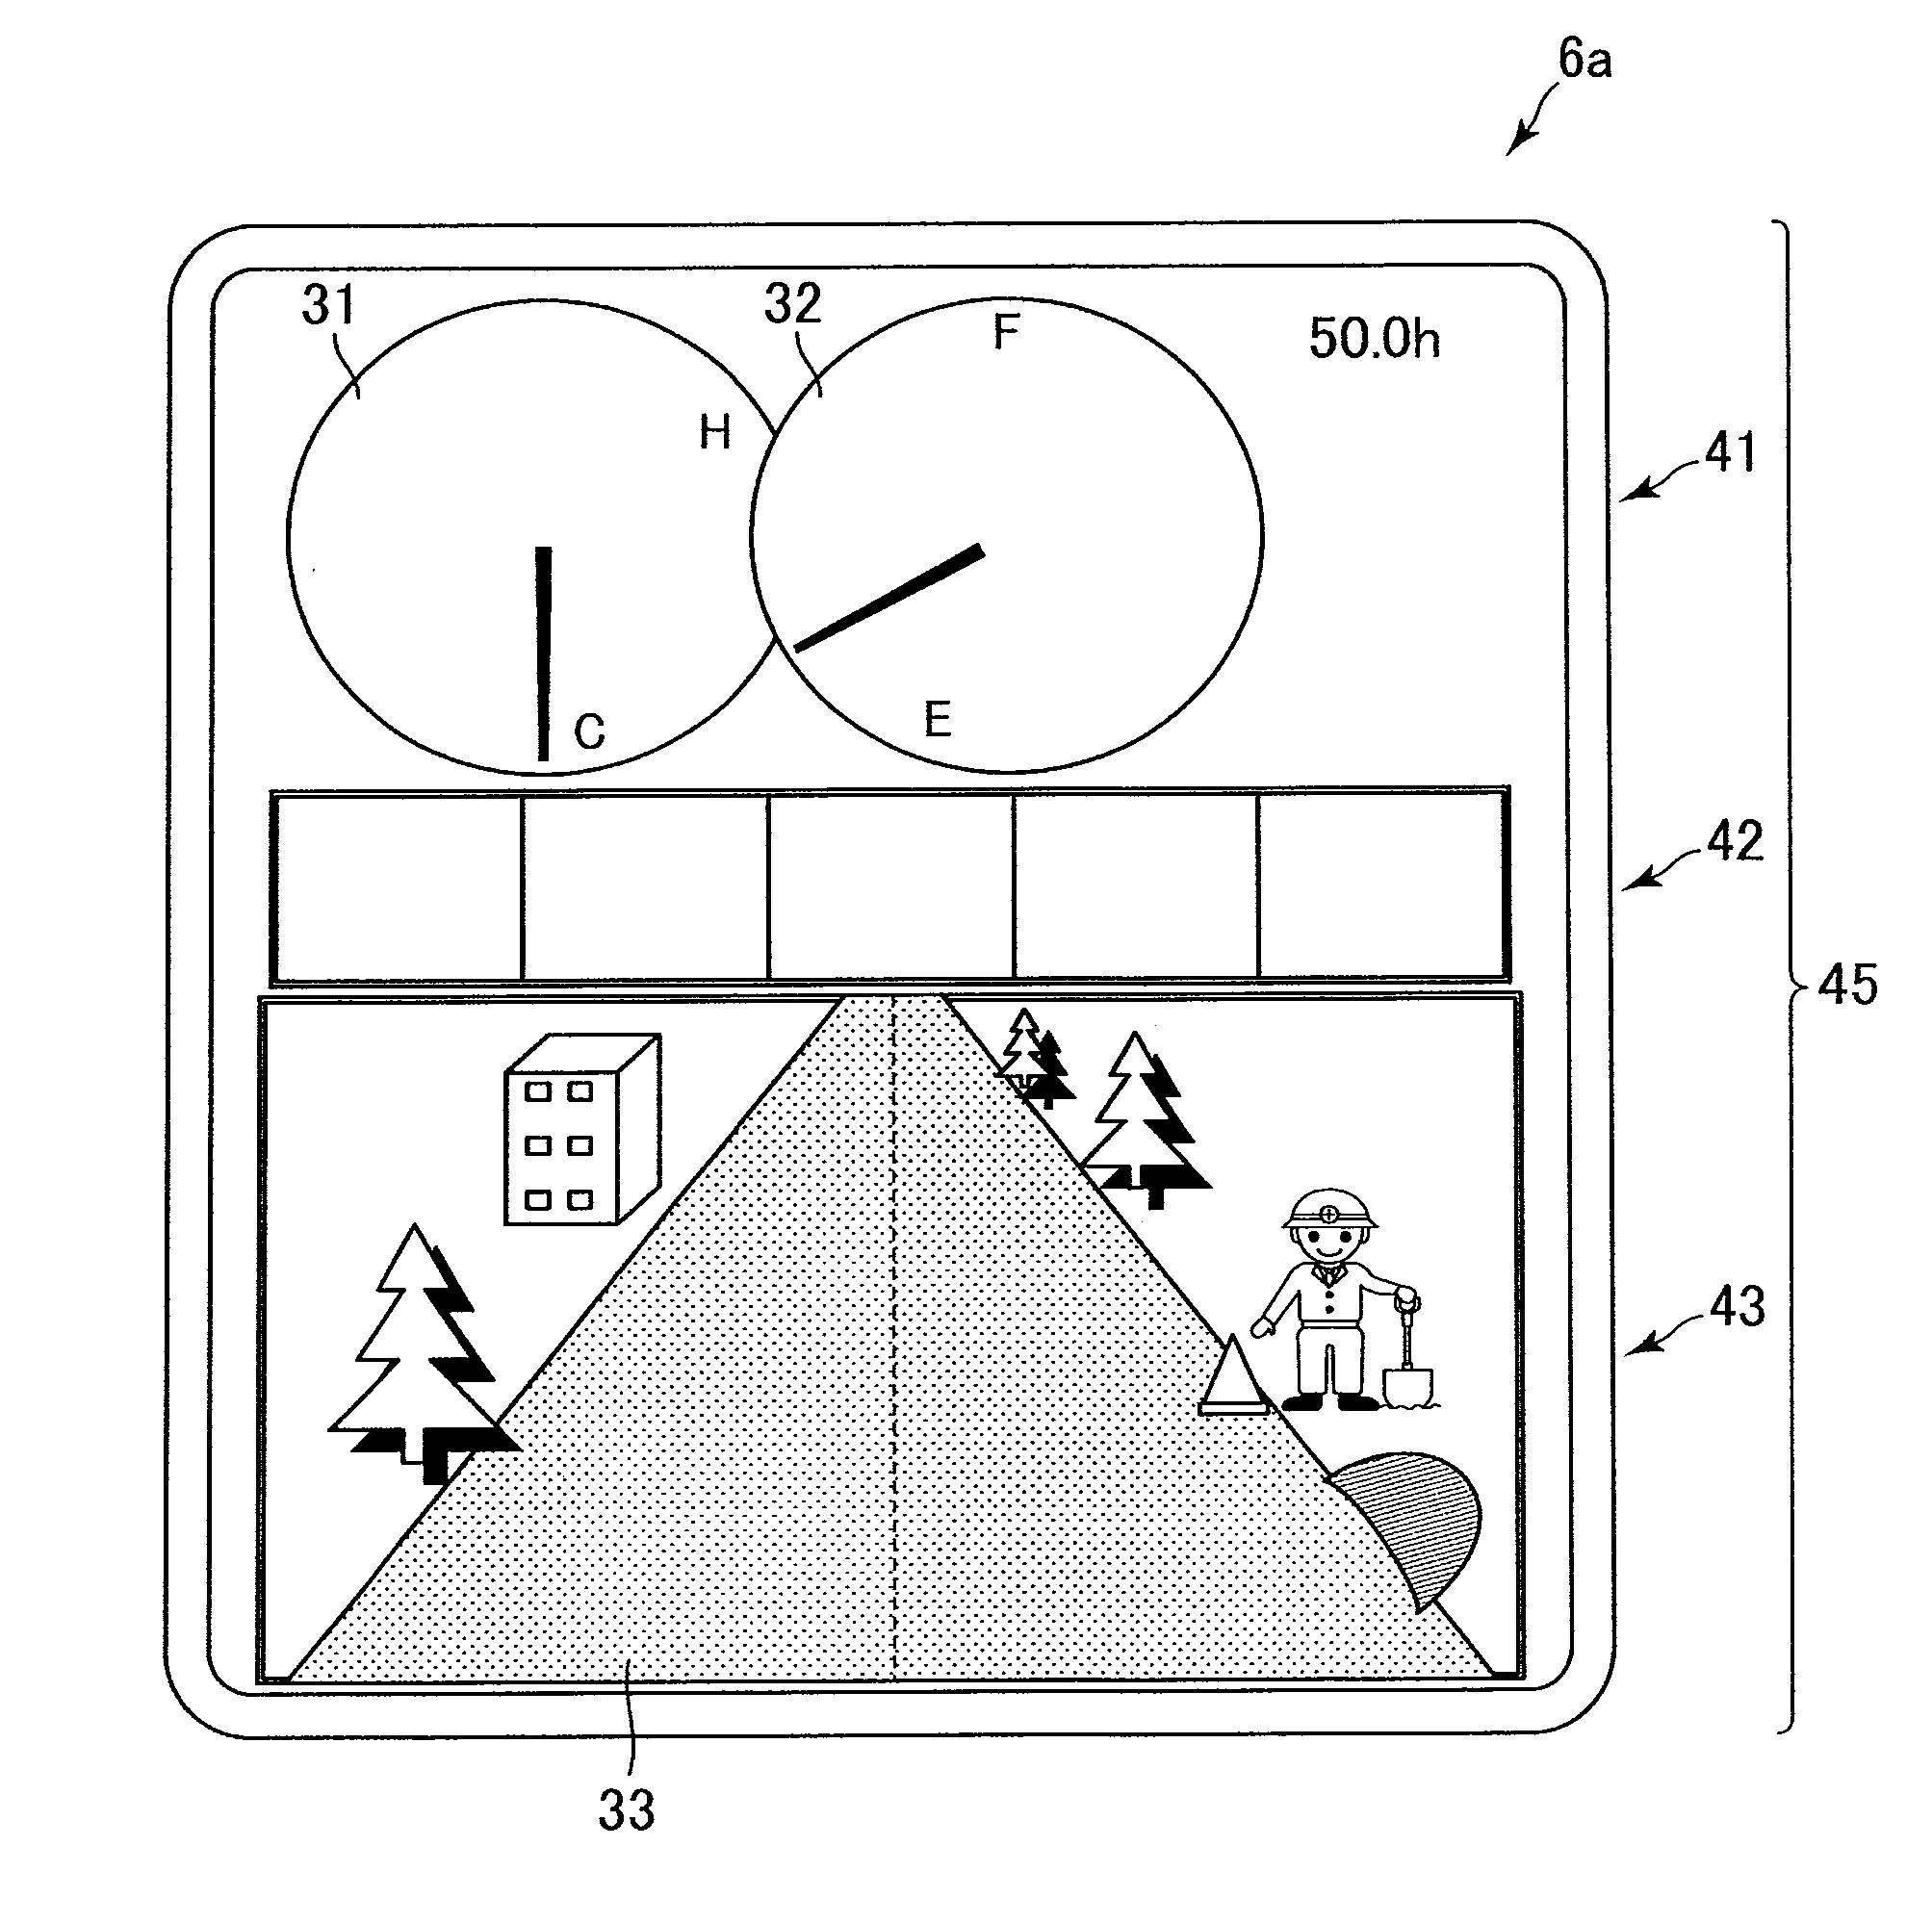 Display system for working machine